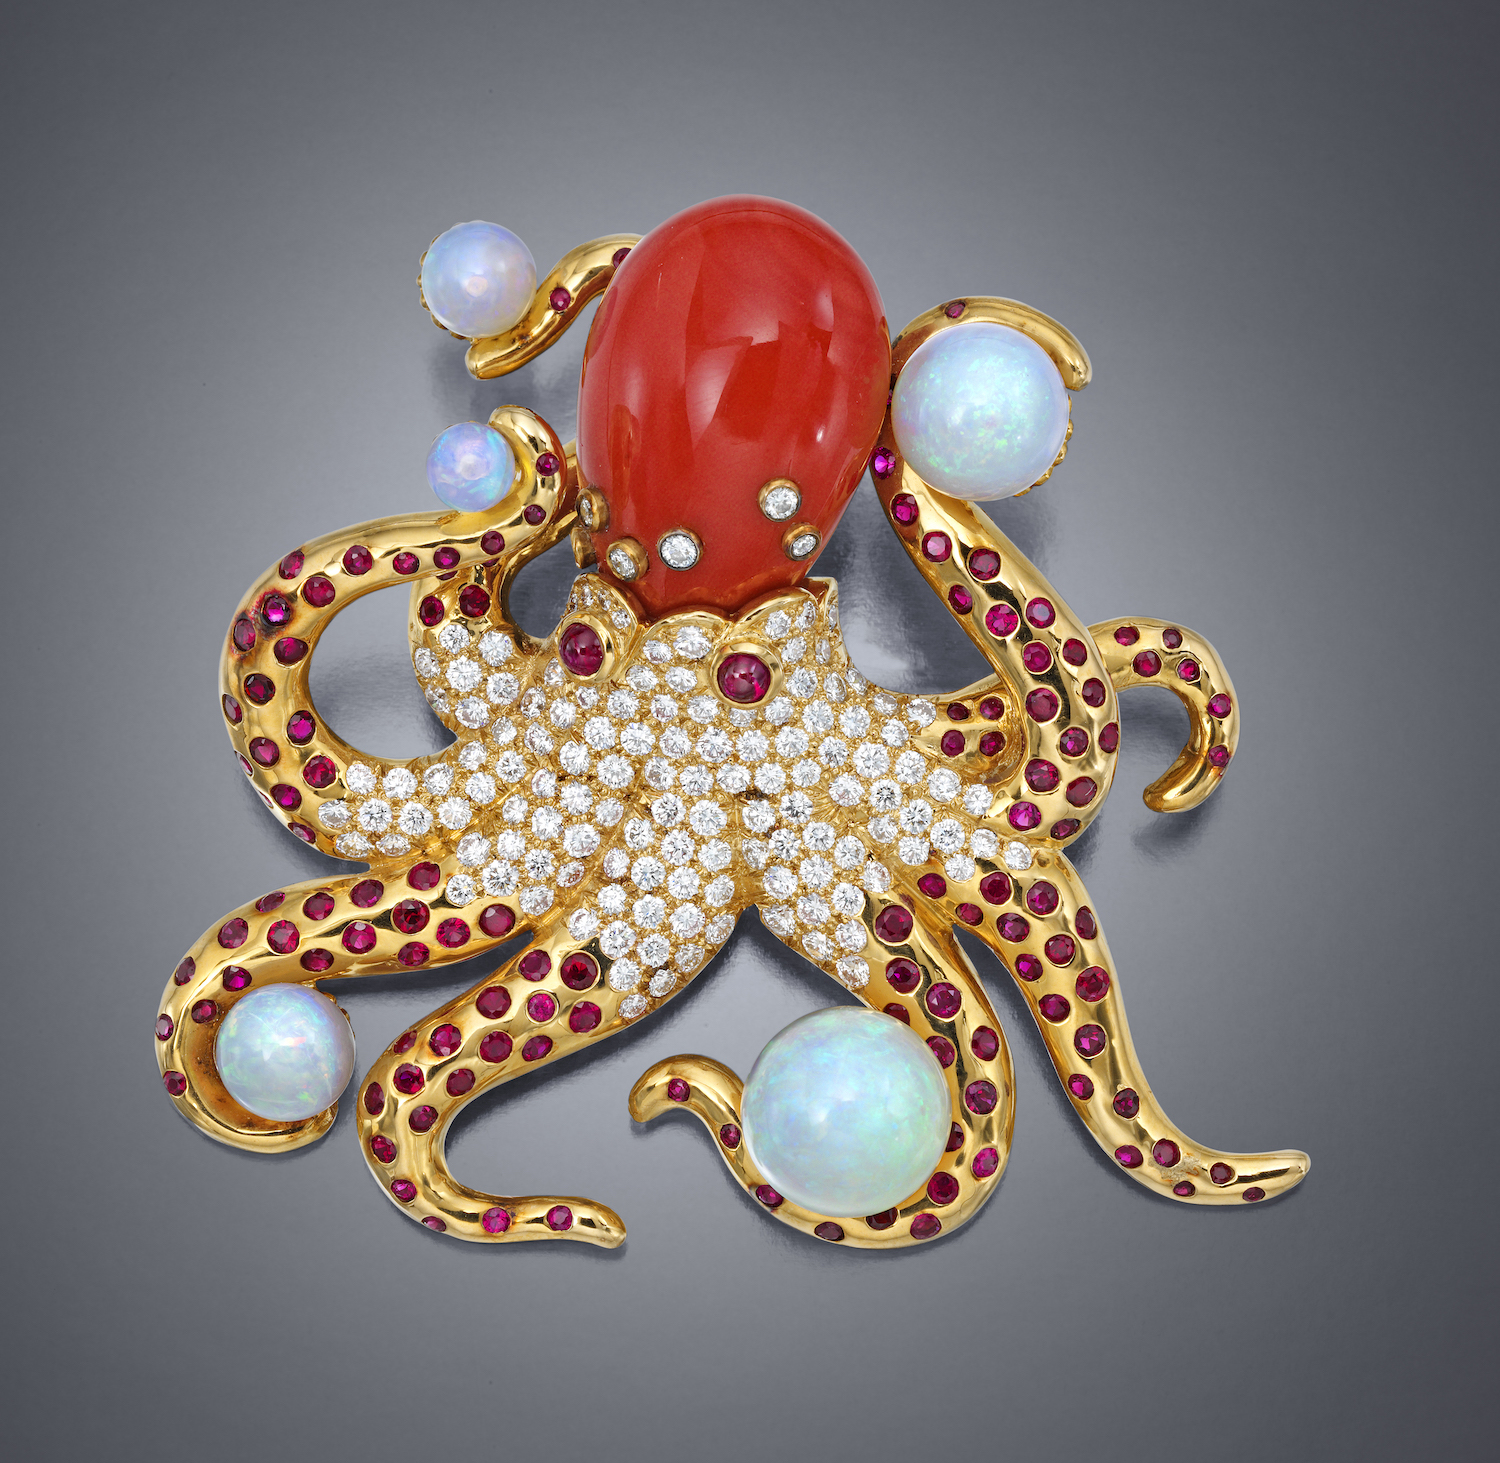 “Octopus” Brooch, 18K gold, coral, opals, diamonds and rubies